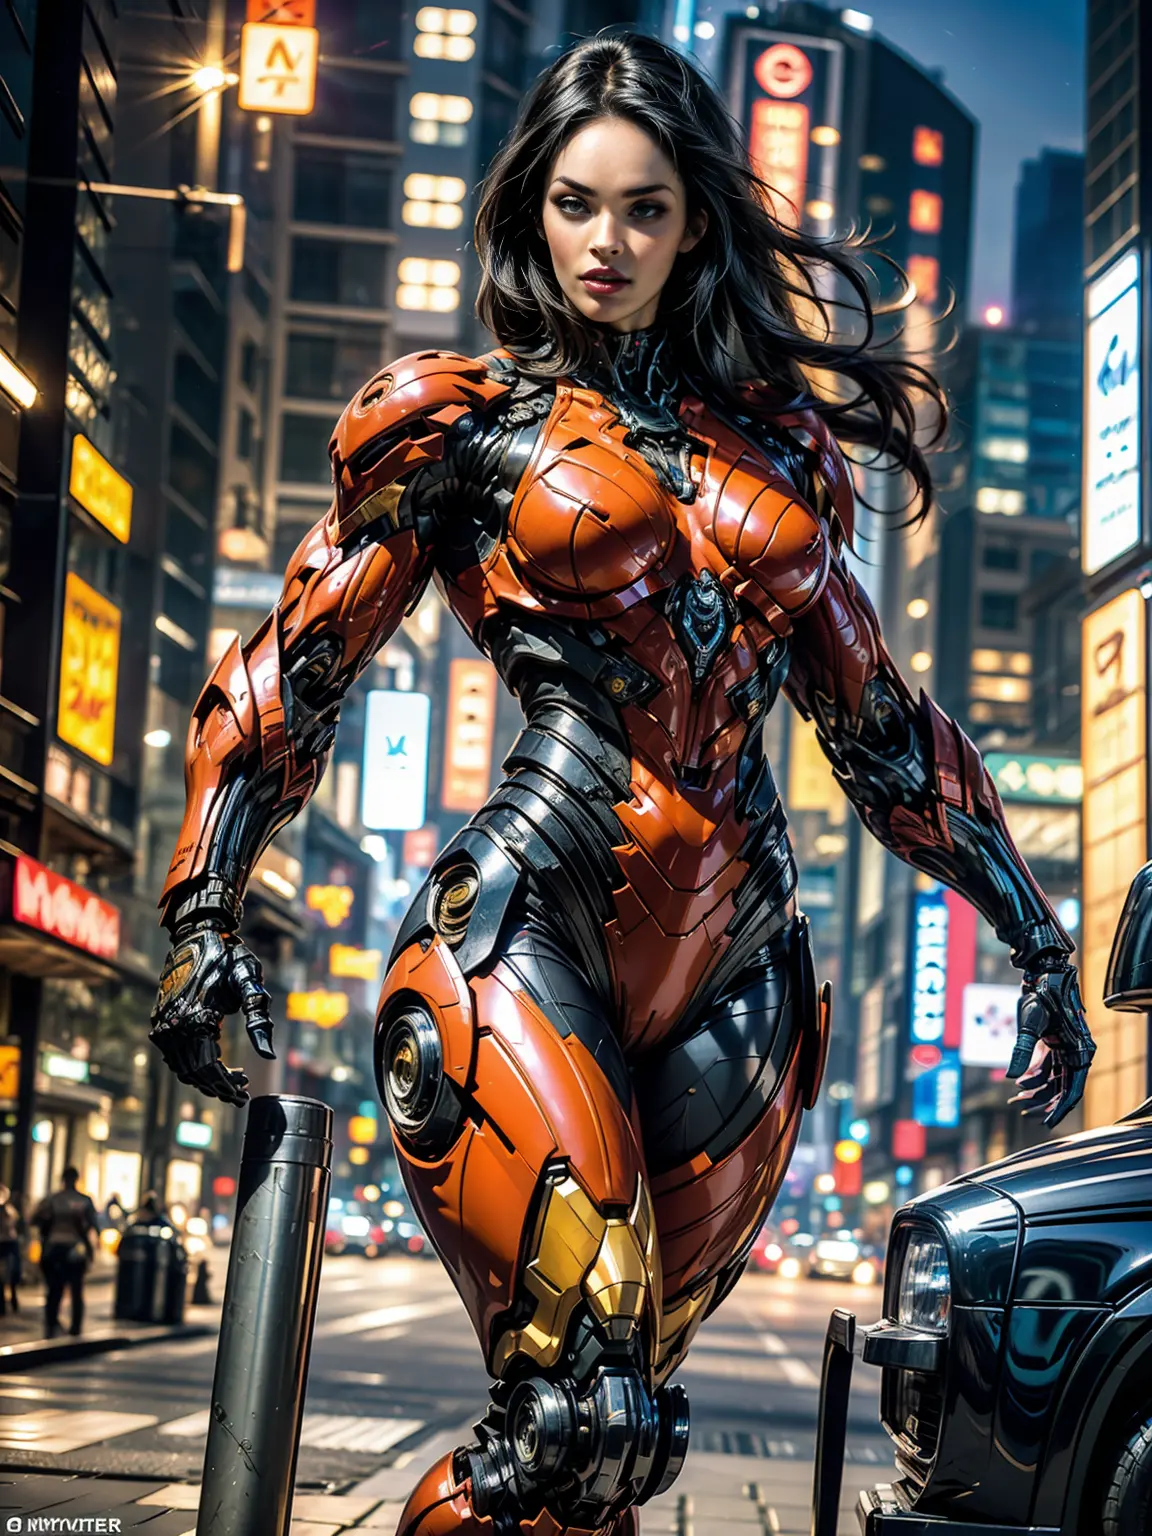 (megan fox), Cinematic, hyper-detailed, and insanely detailed, this artwork captures the essence of a muscular cyborg girl. Beau...